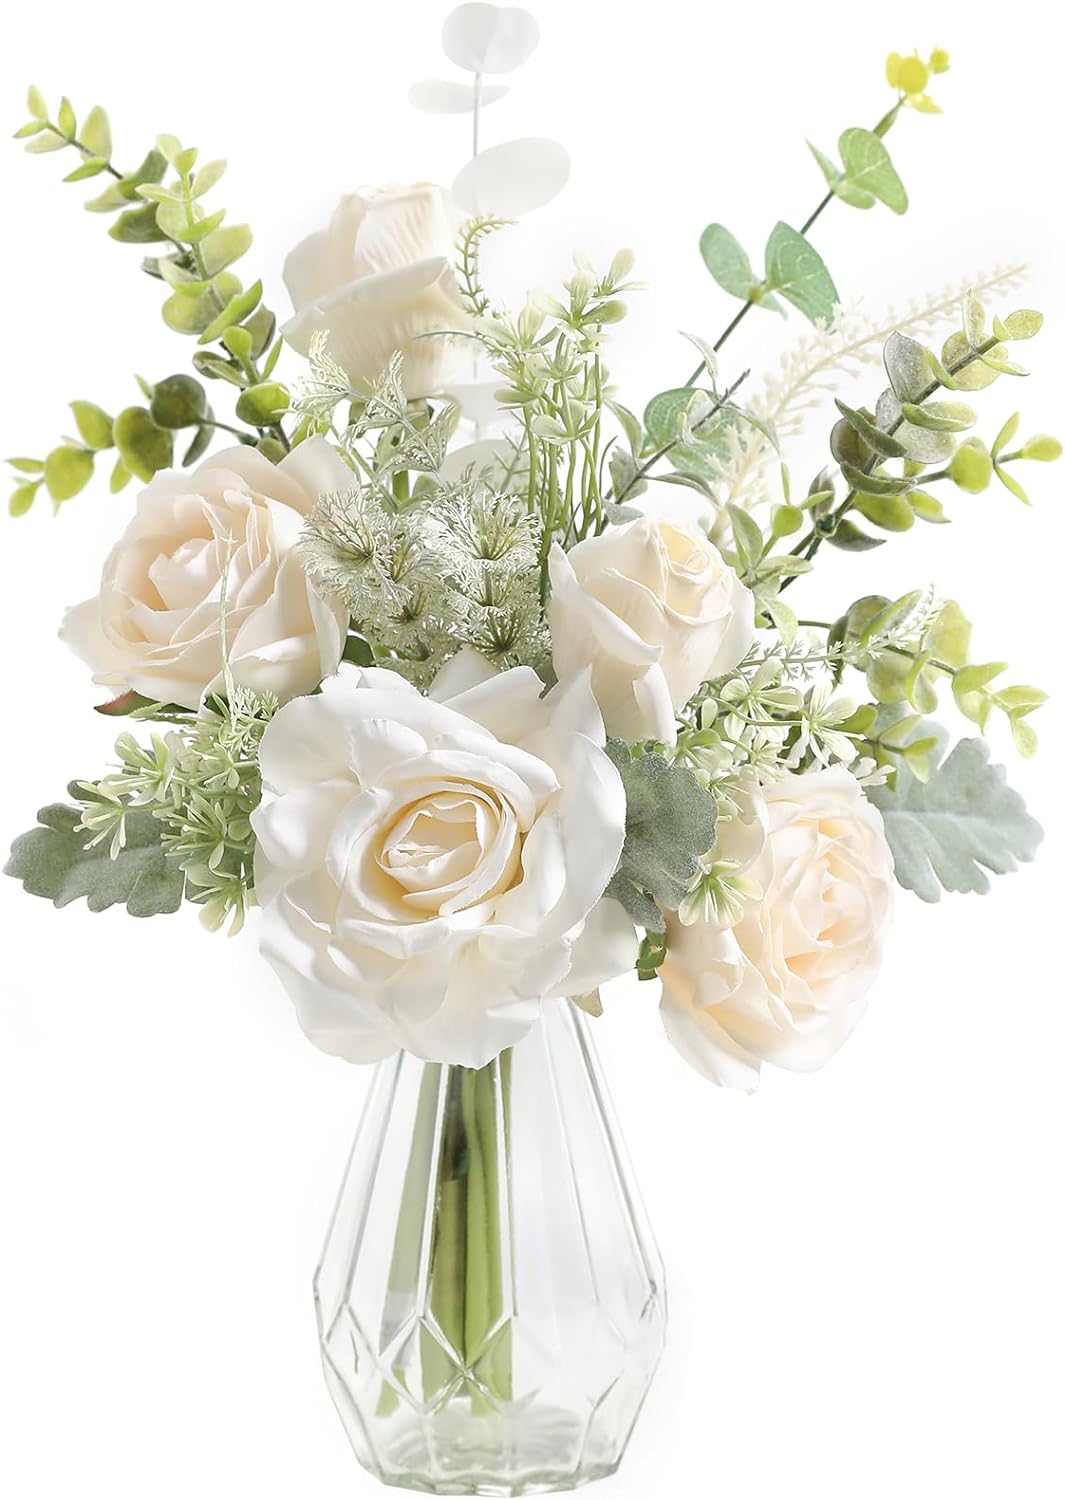 Artificial Flowers with Vase,White Silk Roses and Fake Plant Eucalyptus in Vase,Faux Flower Arrangement with Vase Suitable for Home Office Decoration, Living Room and Dining Table Centerpiece